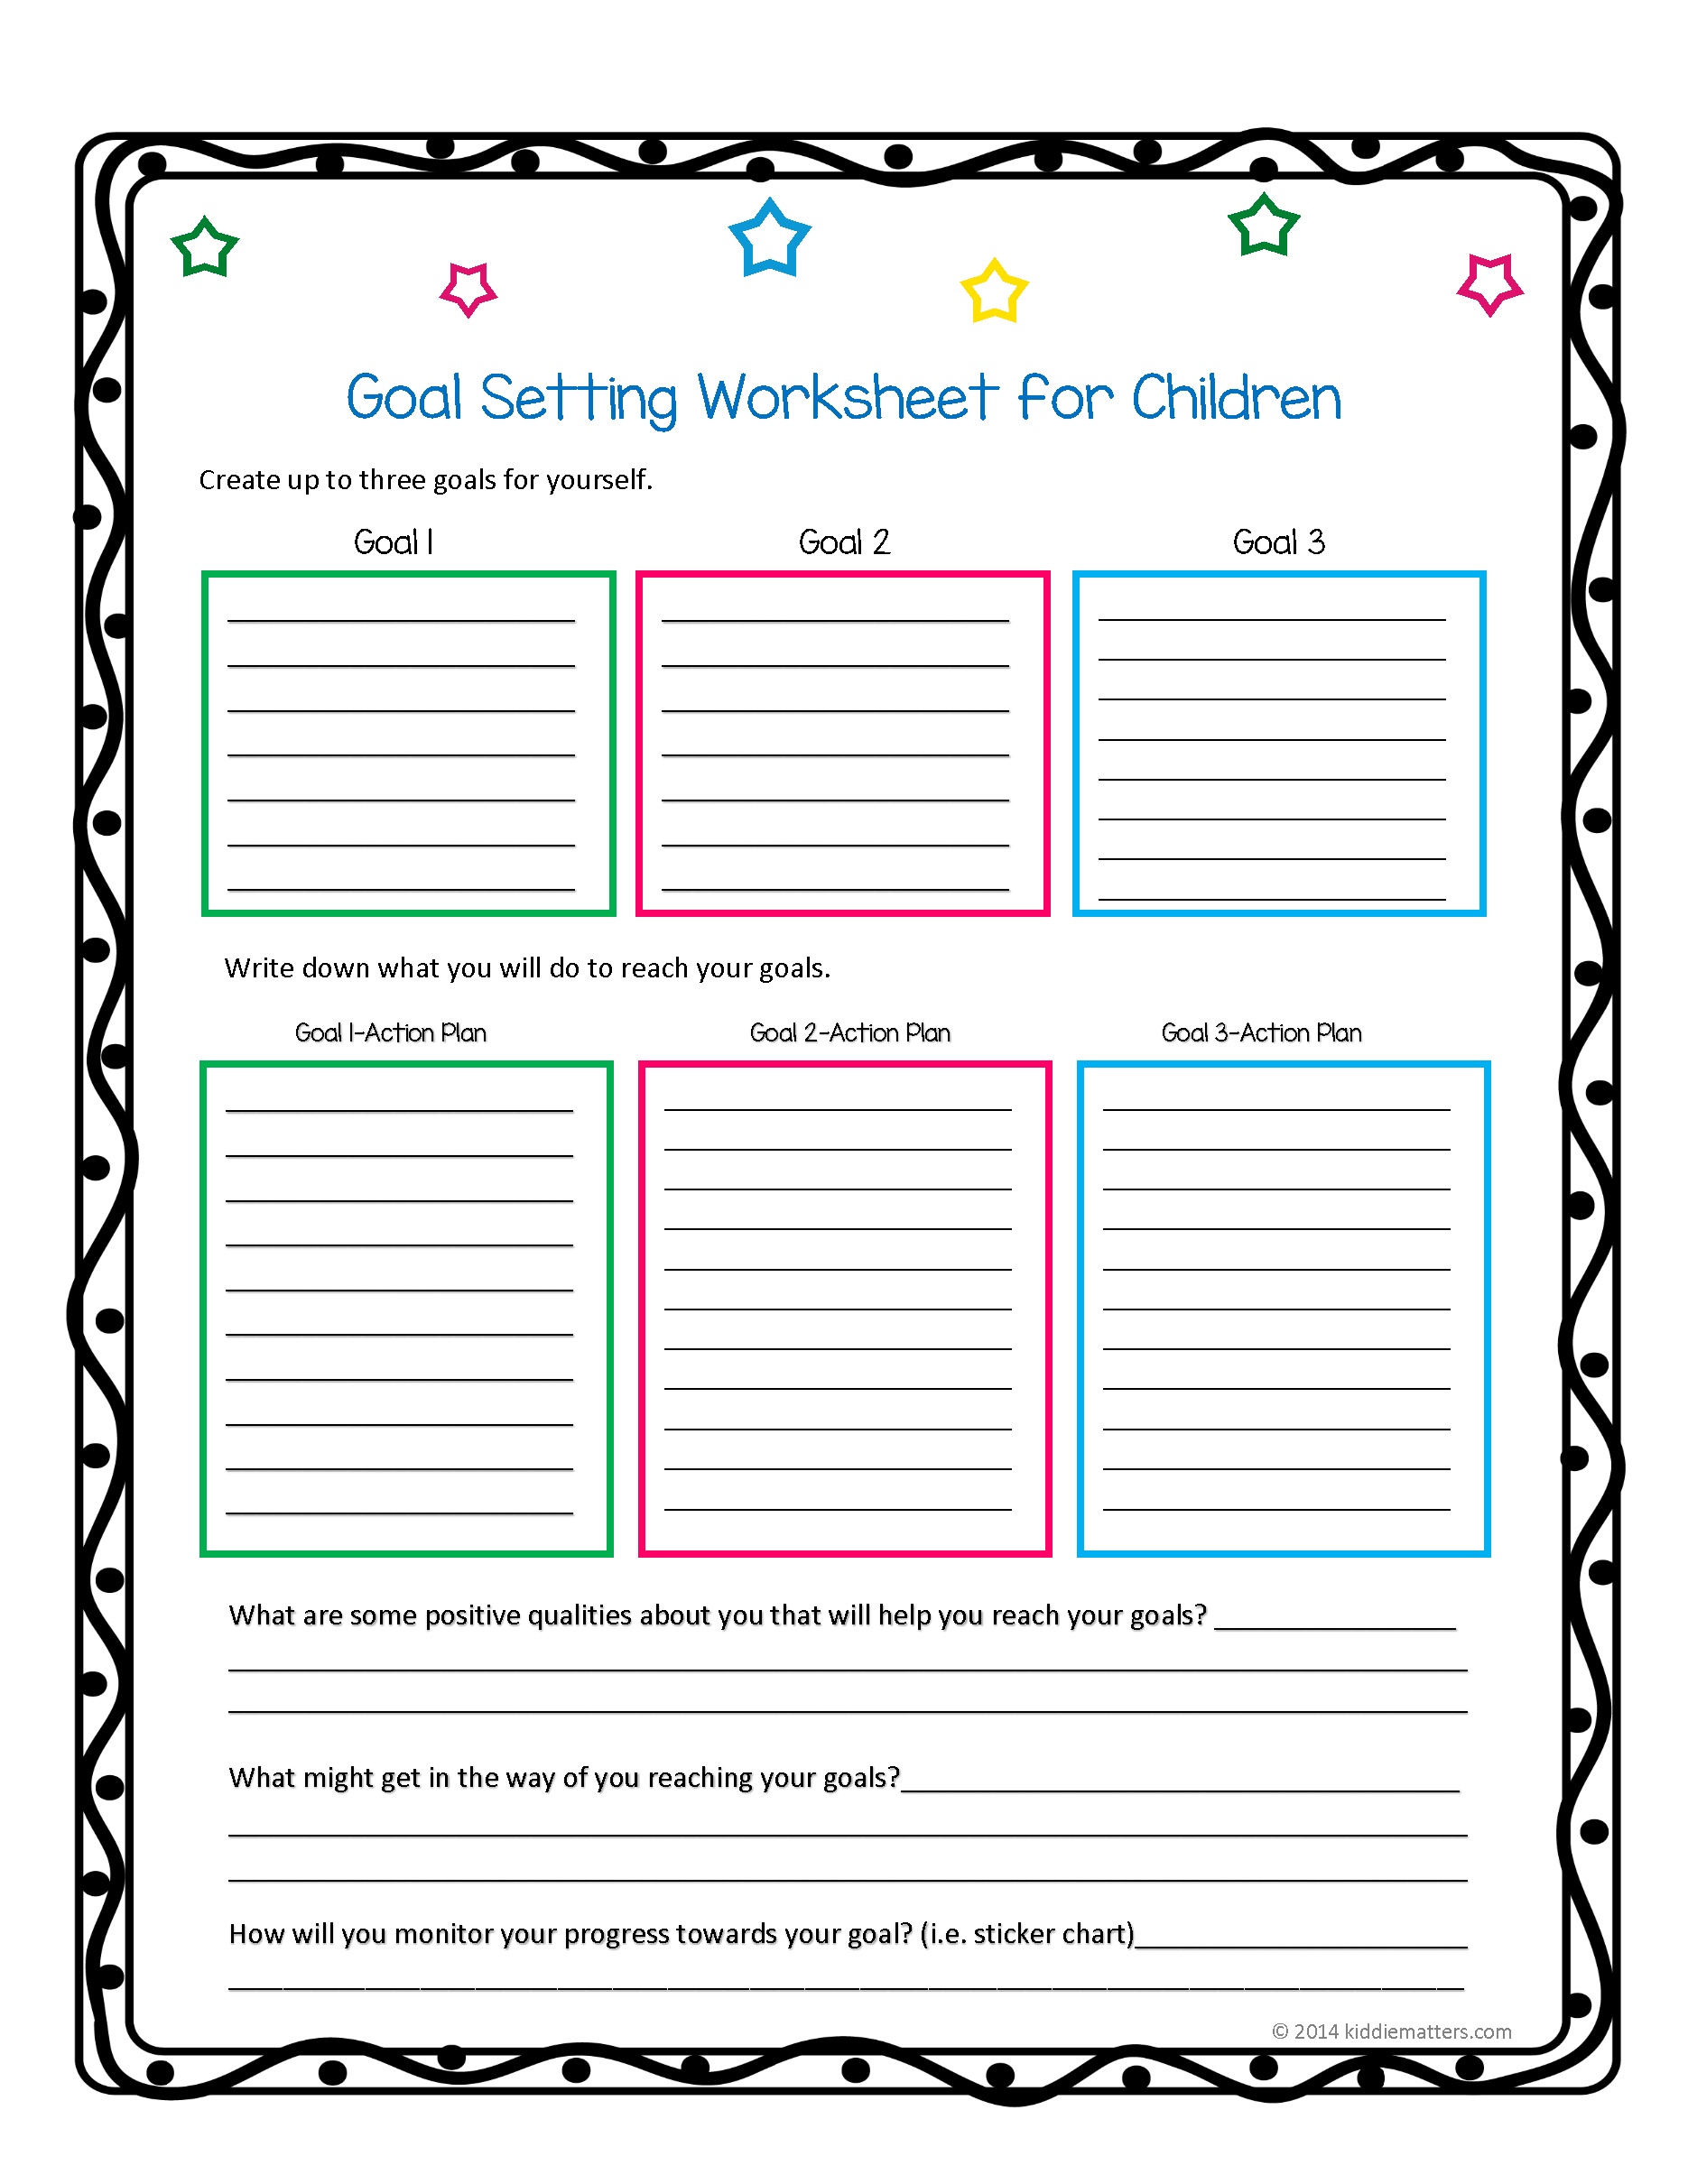 This Worksheet And Free Printable Helps Children Learn How To Set - Free Printable Goal Setting Worksheets For Students